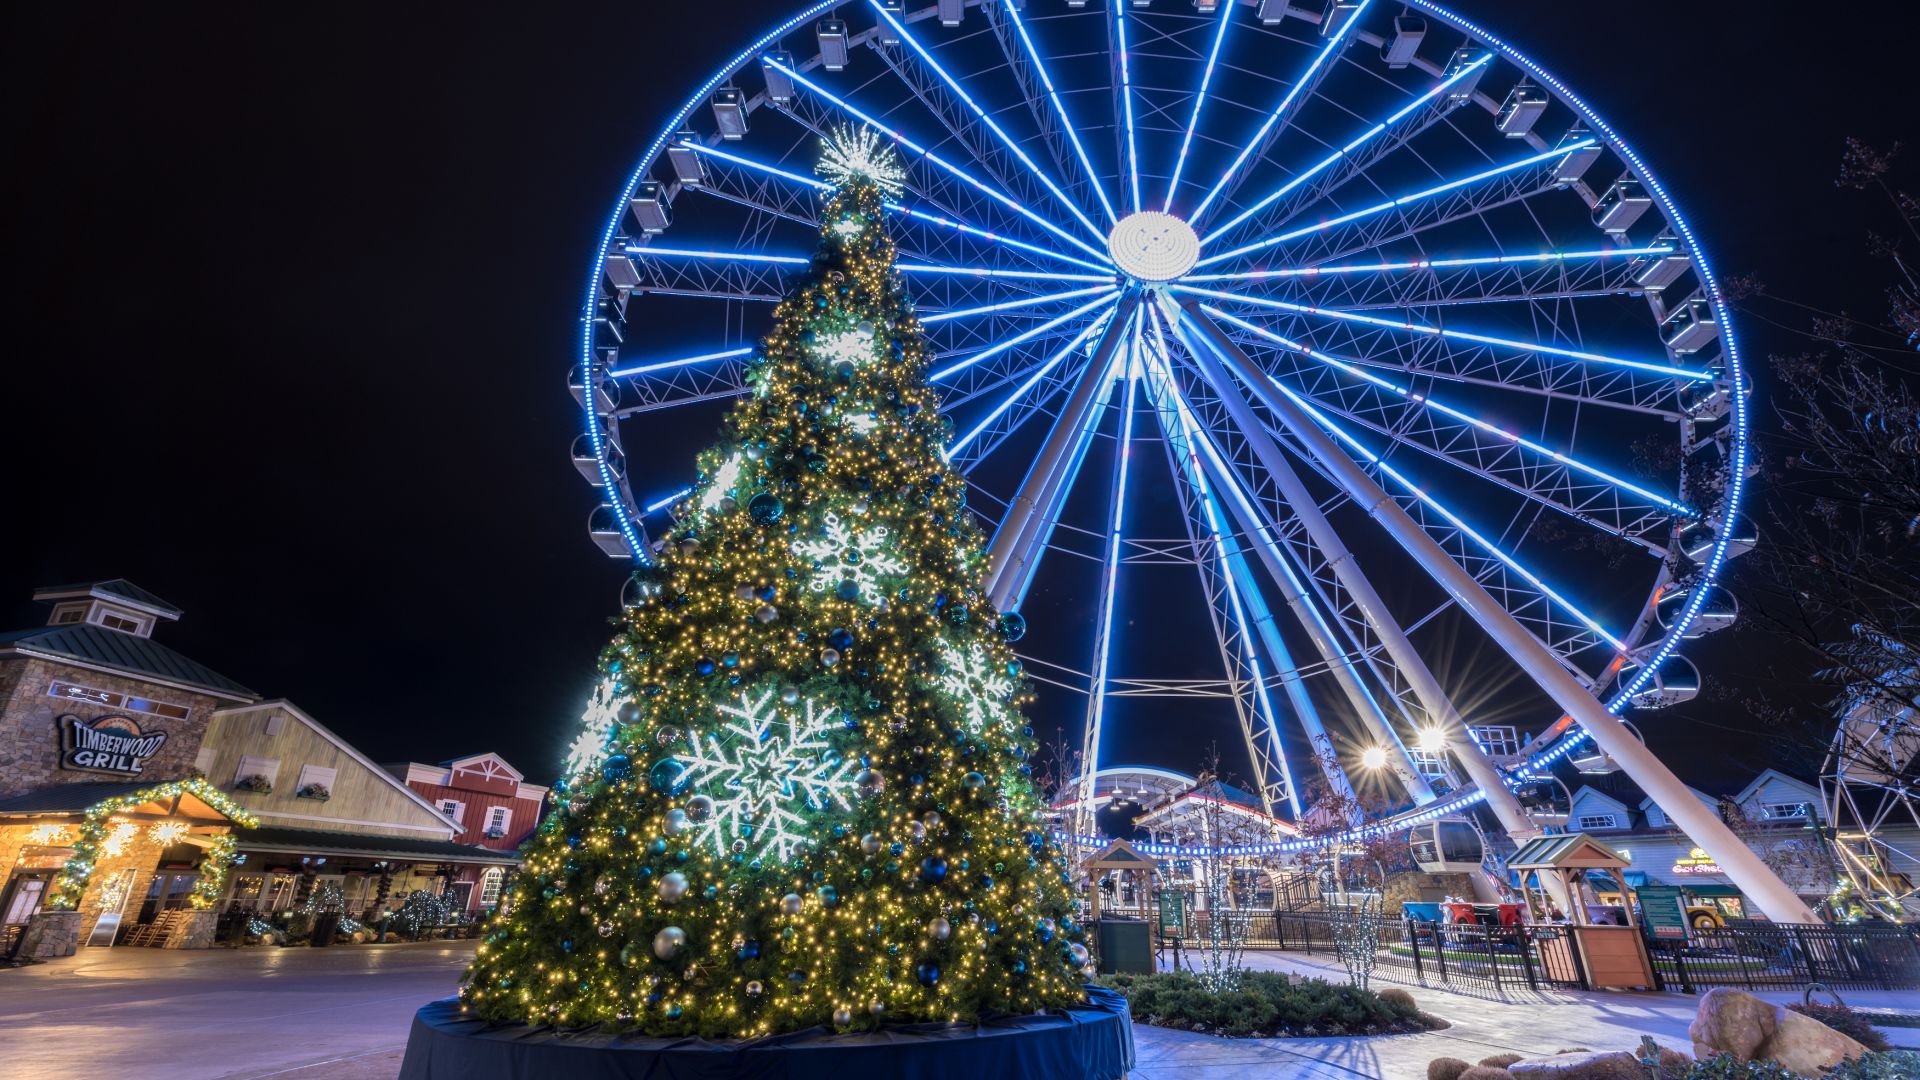 The Island Pigeon Forge Ferris Wheel at Christmas